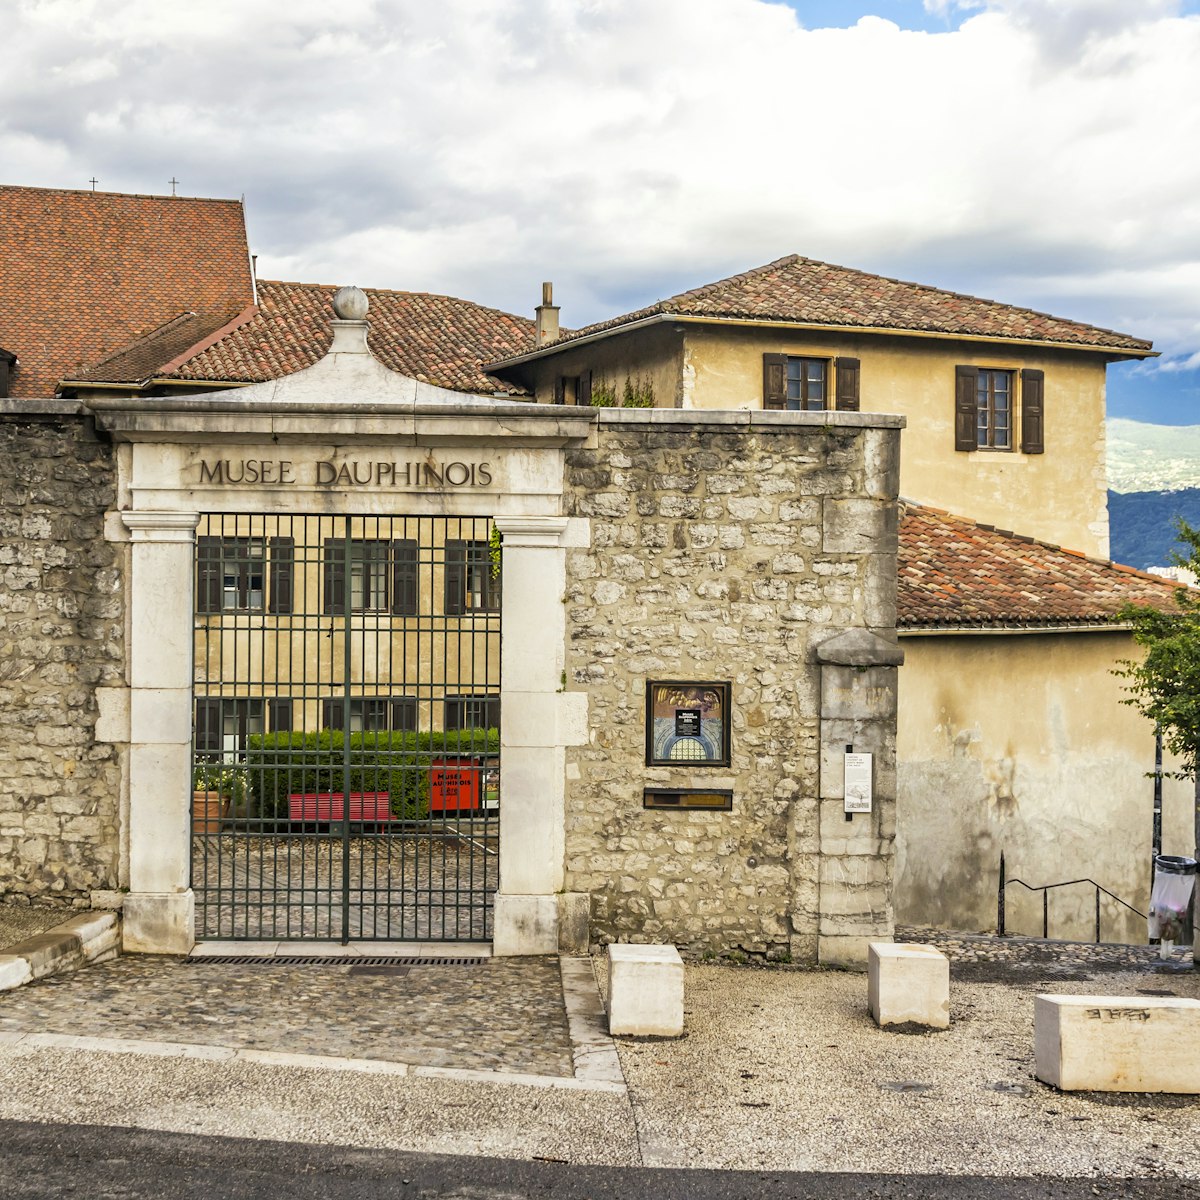 Entrance of the Dauphinois museum (Musee dauphinois) in Grenoble.